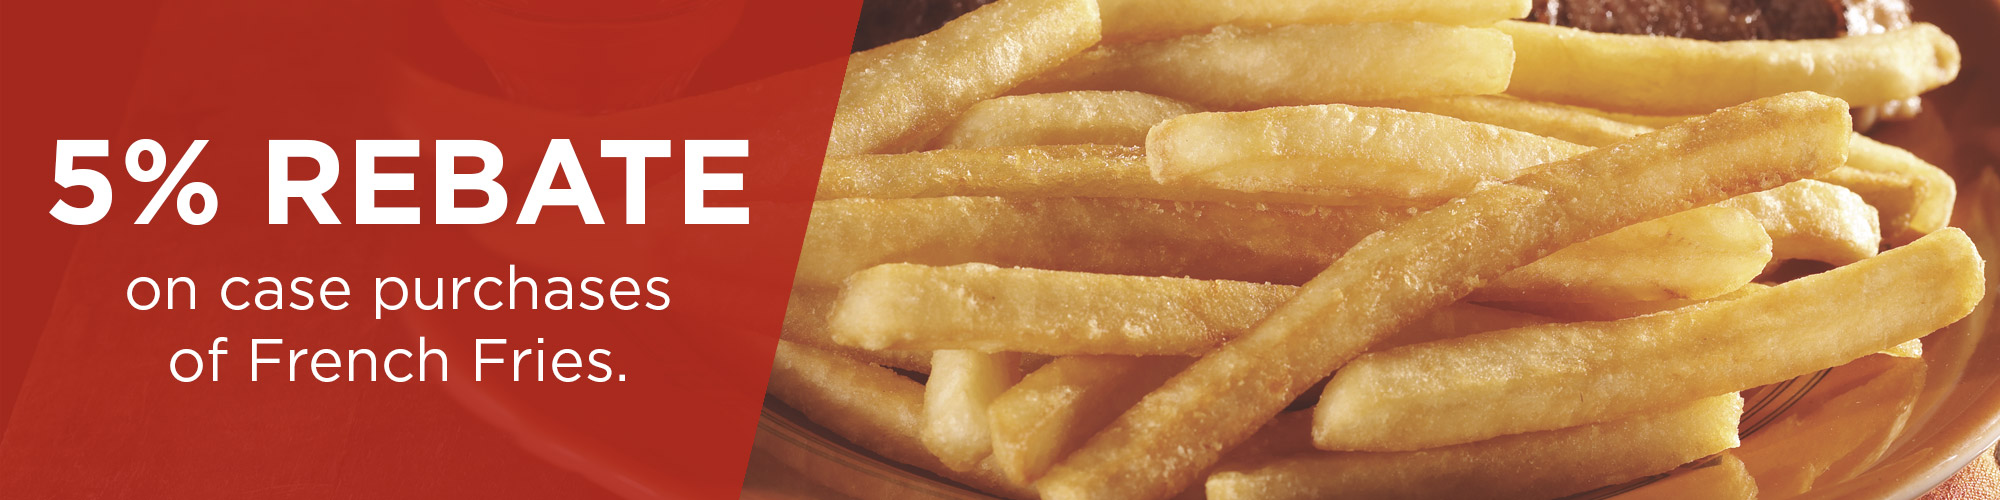 5% Rebate on case purchases of french fries